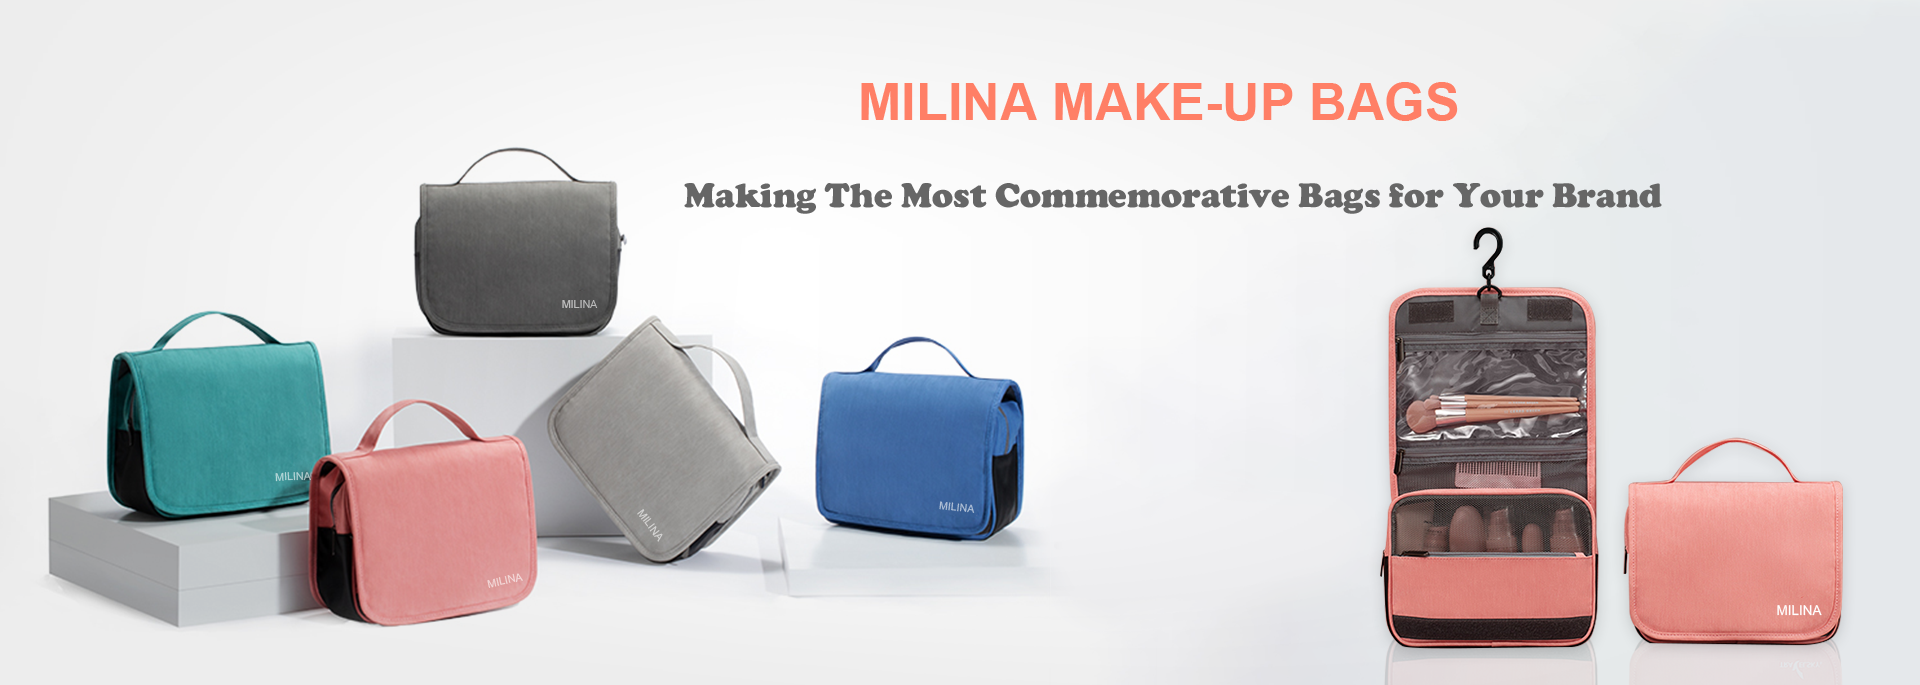 Make-up bags ad